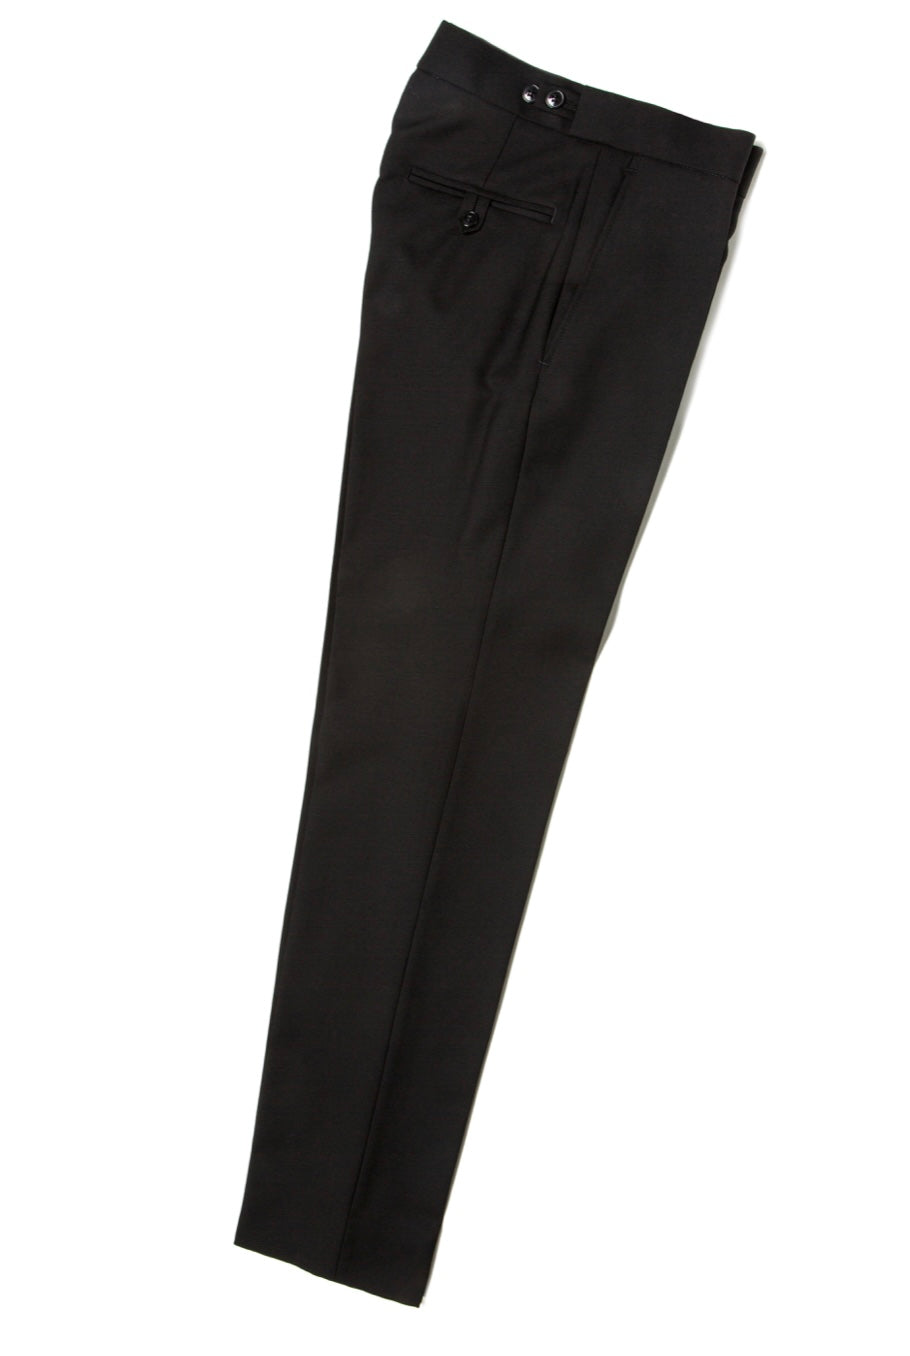 Classic drainpipe trousers in solid-coloured fabric in chicory coffee | The  official BASLER Online Shop - women's fashion brand with the highest  standards of quality